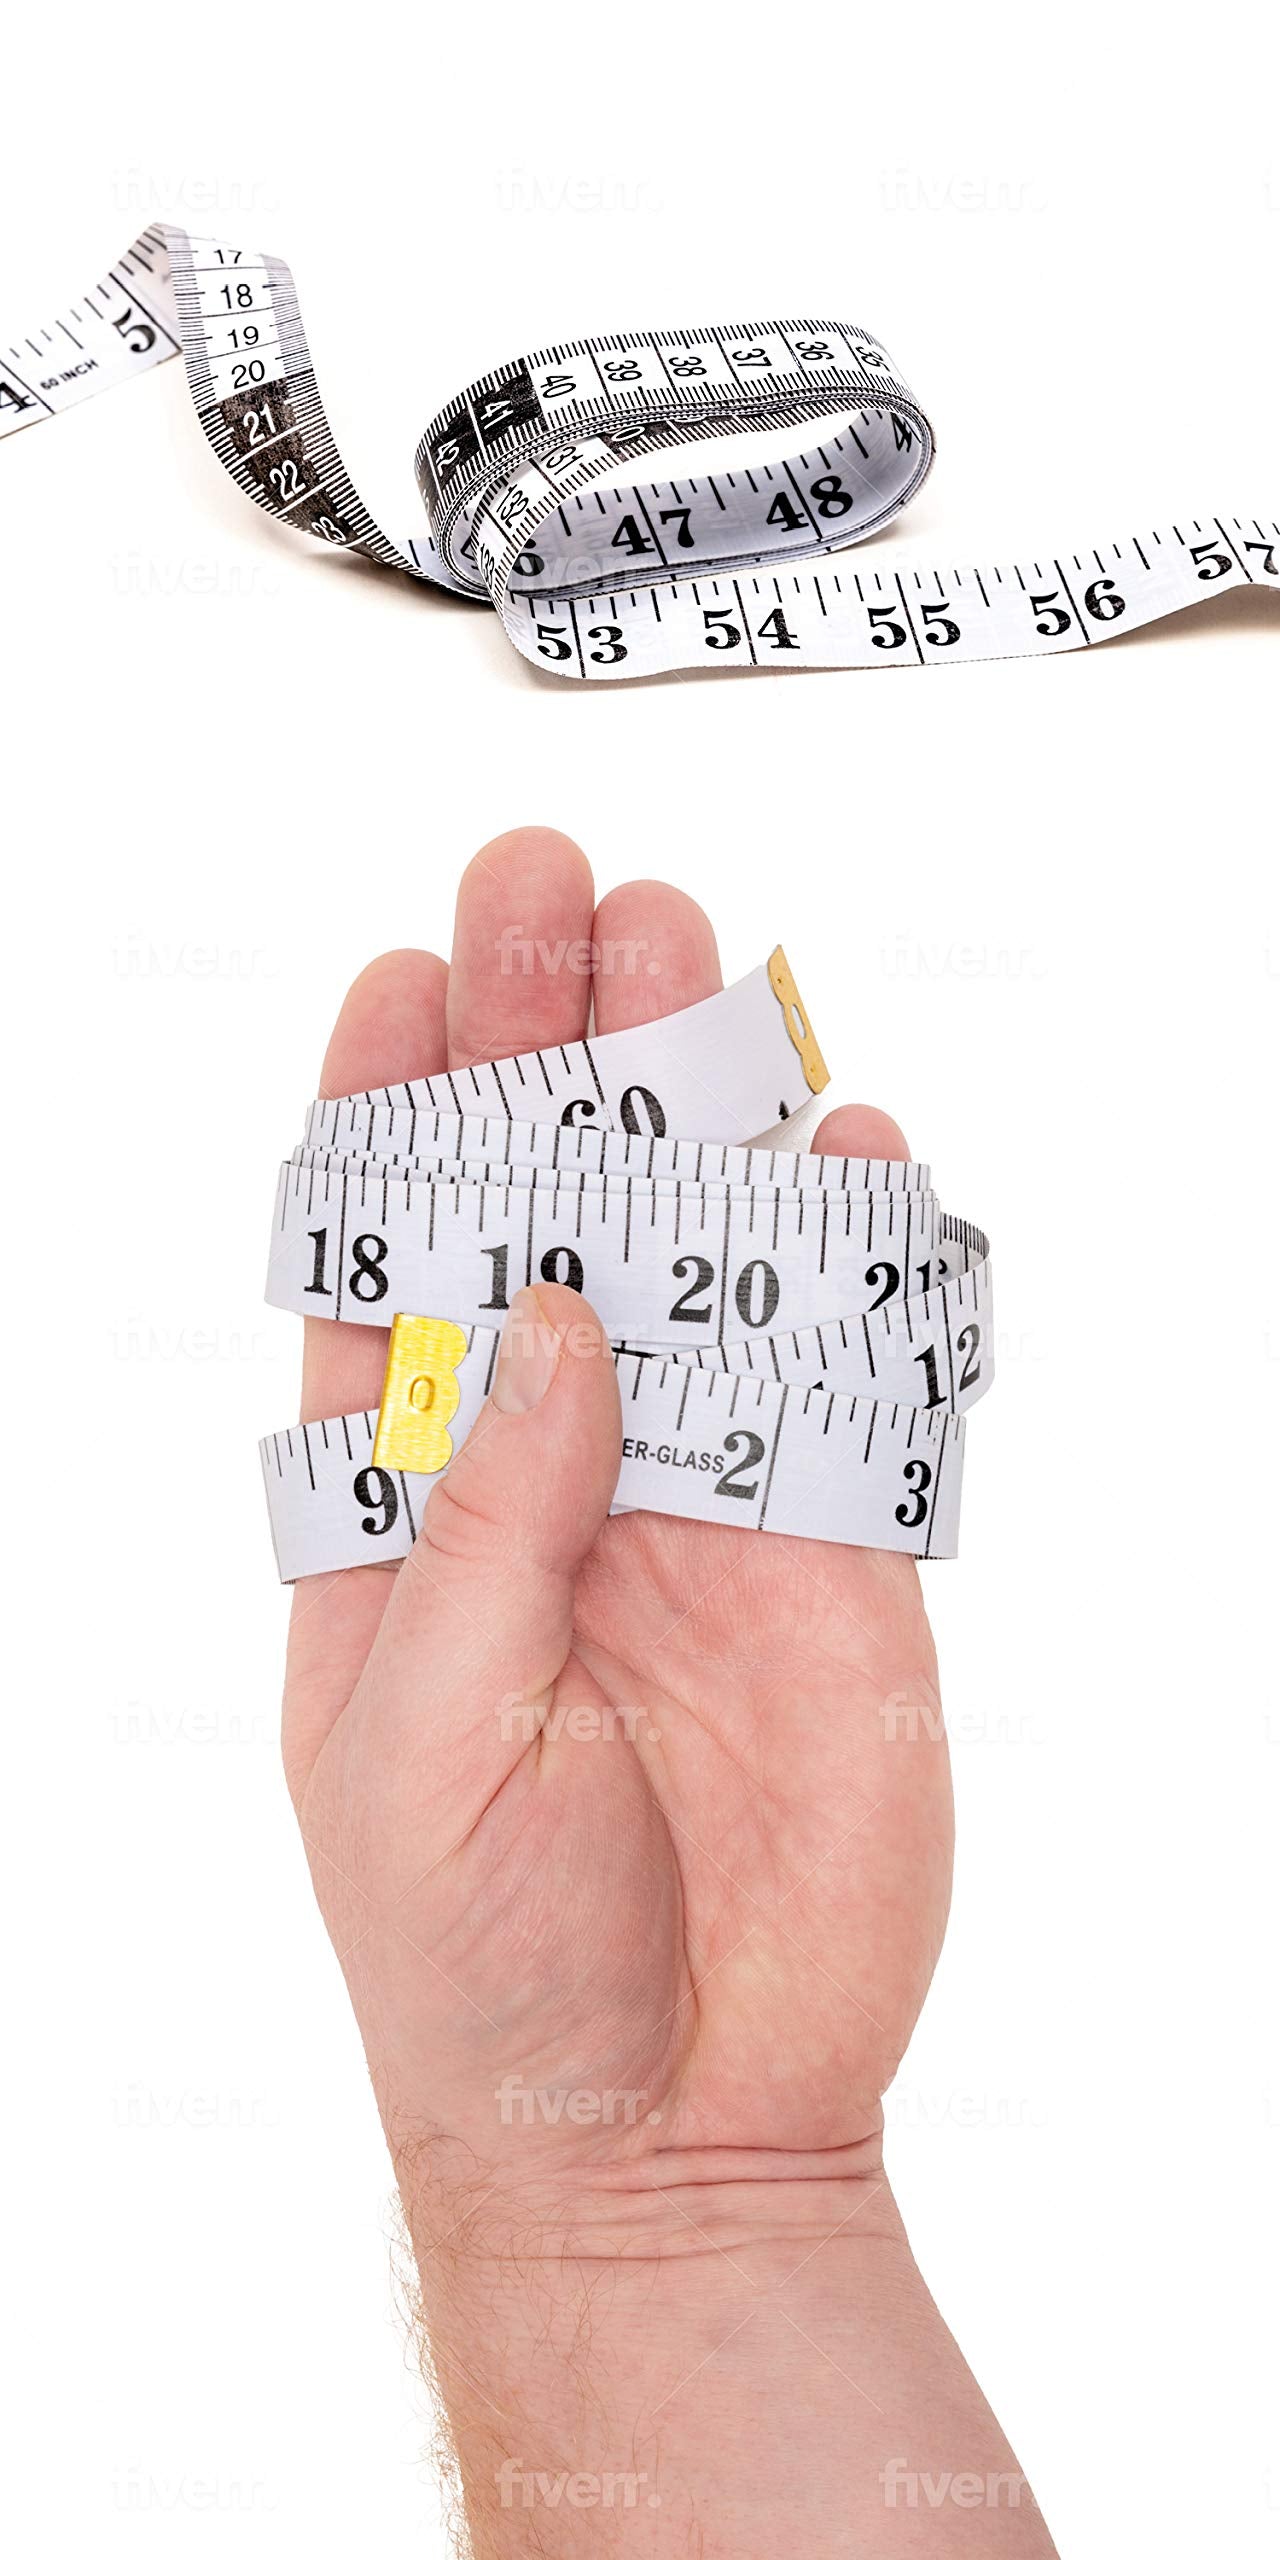 Dual Sided Body Measuring Soft Tape, 60 inch / 150 cm White and Black